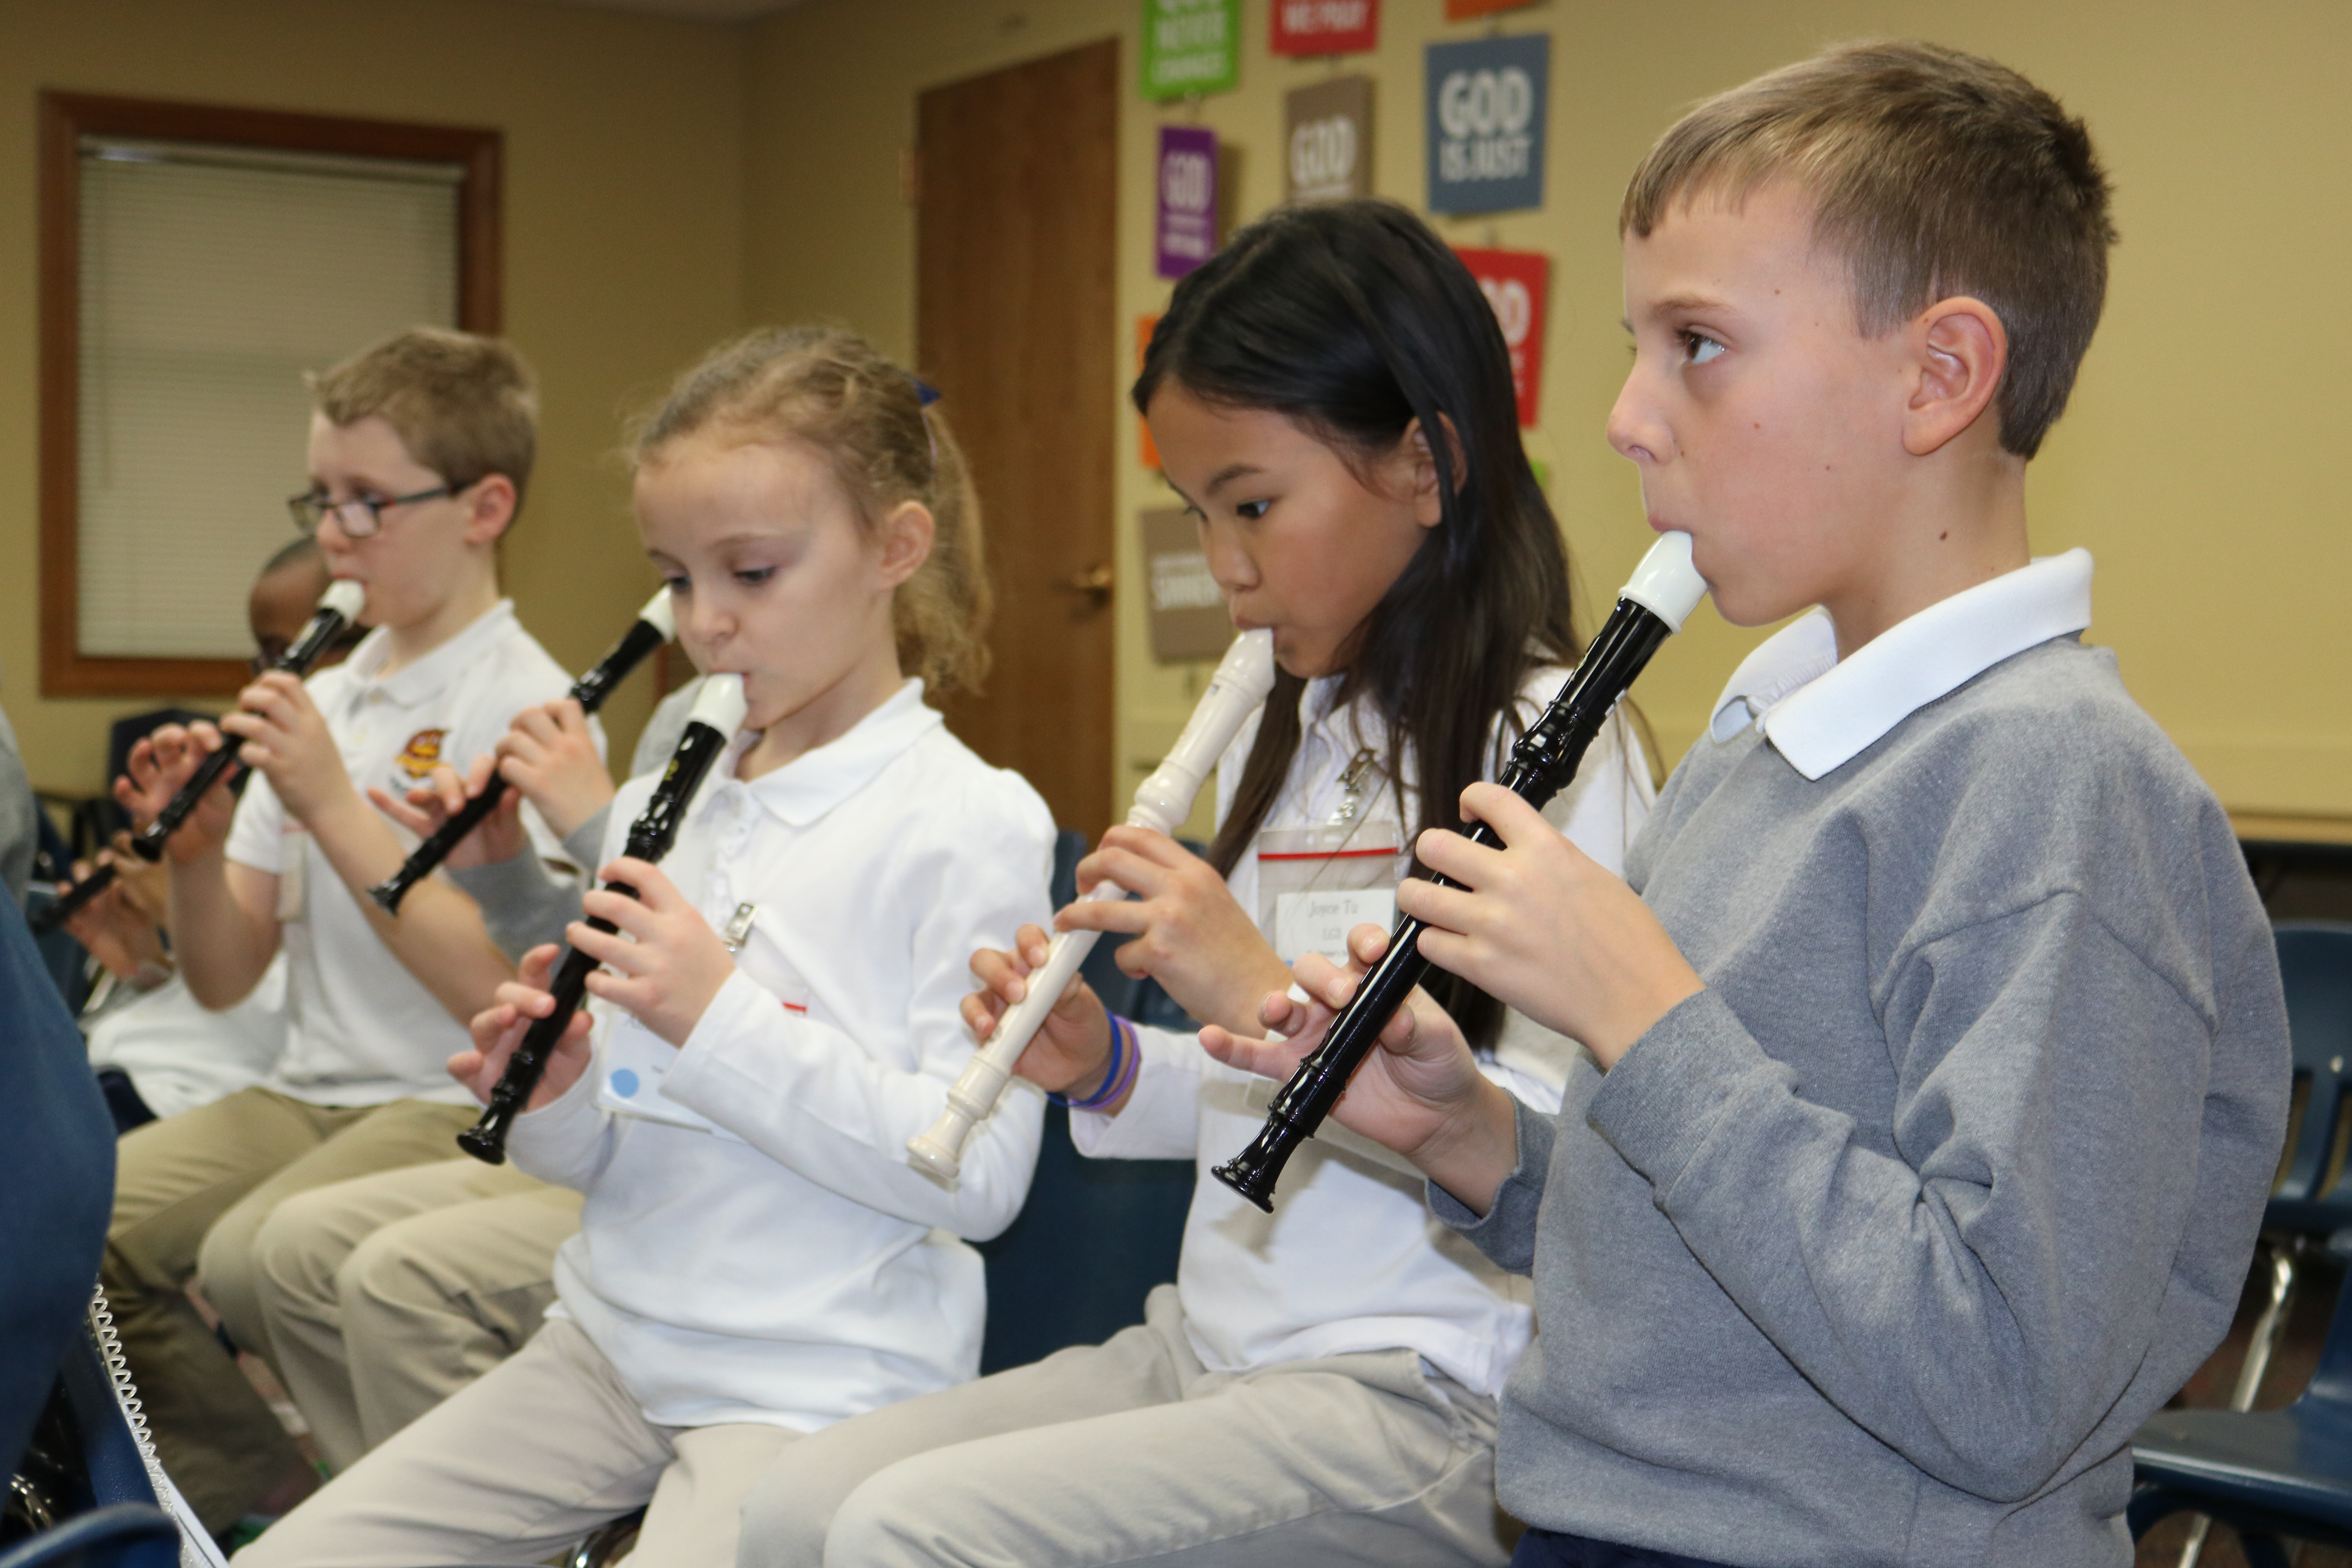 Practicing the recorder for Final Performance